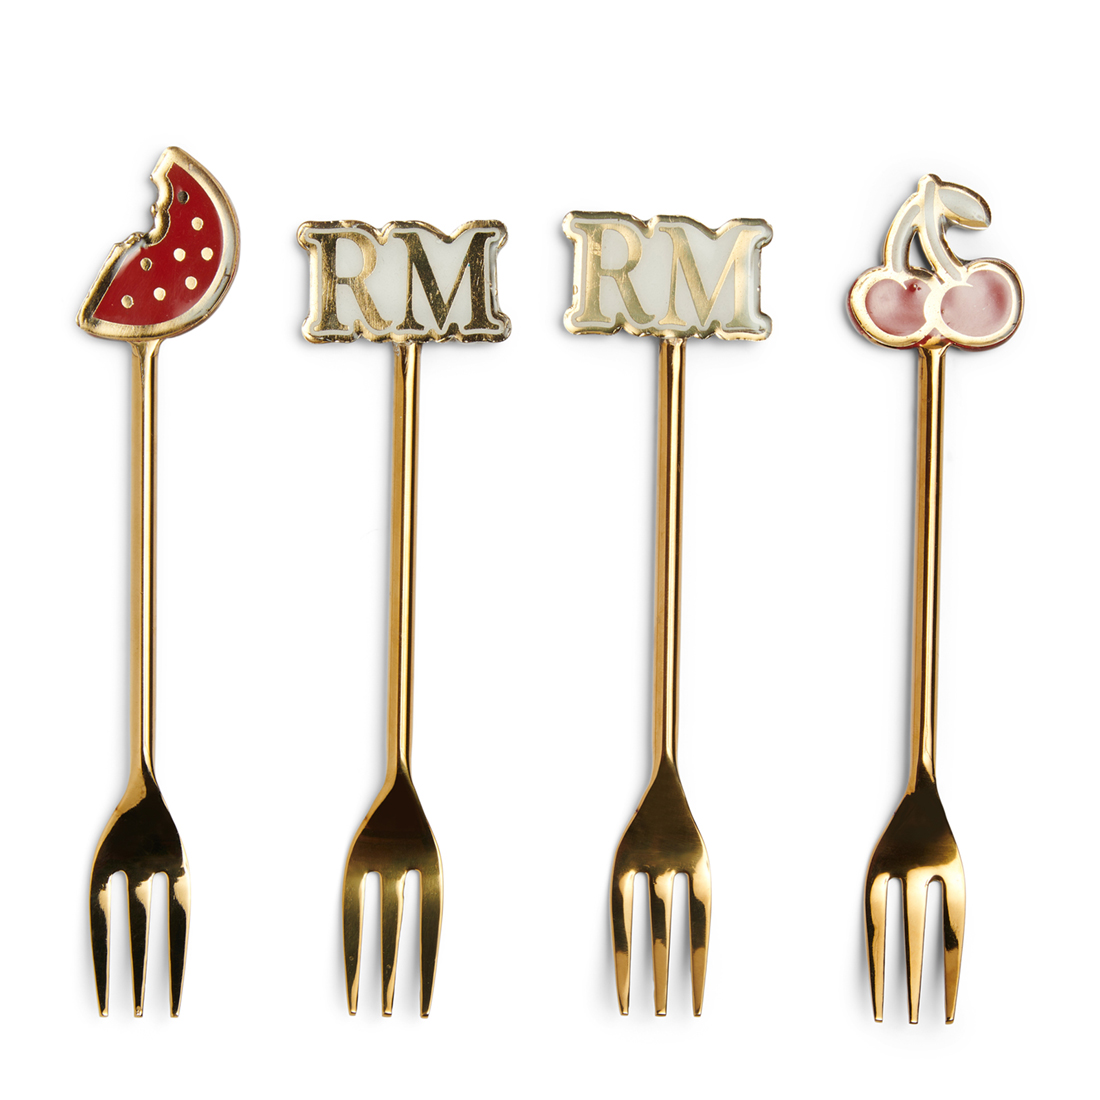 Riviera Maison RM Summer Small Forks 4 pieces - Roestvrij Staal - 15.5x4.0x1.0 cm